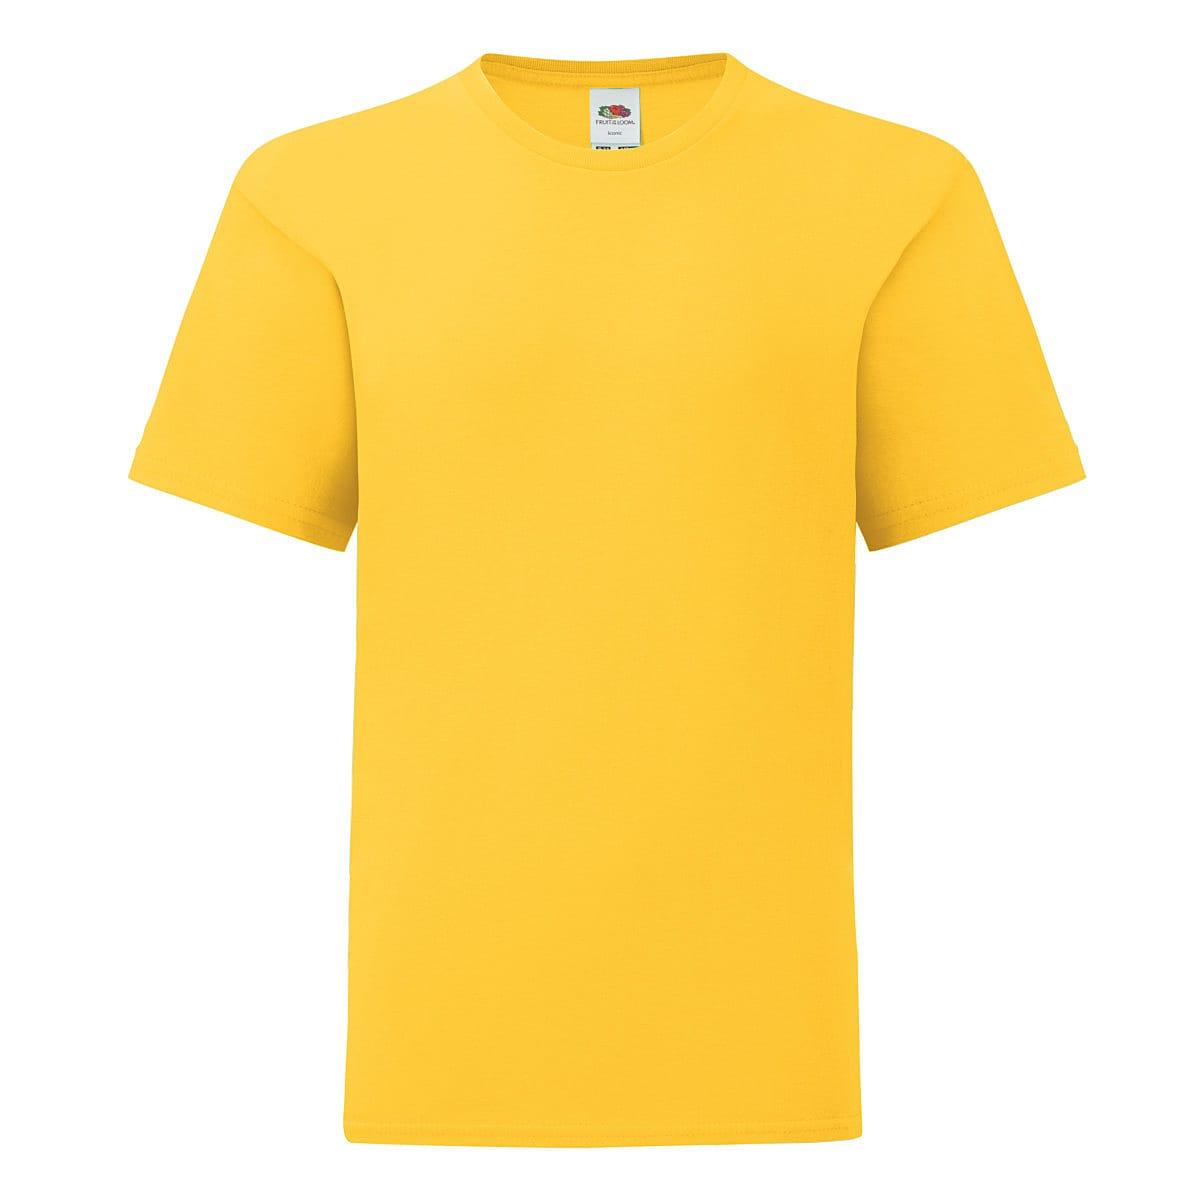 Fruit Of The Loom Kids Iconic T-Shirt in Sunflower (Product Code: 61023)